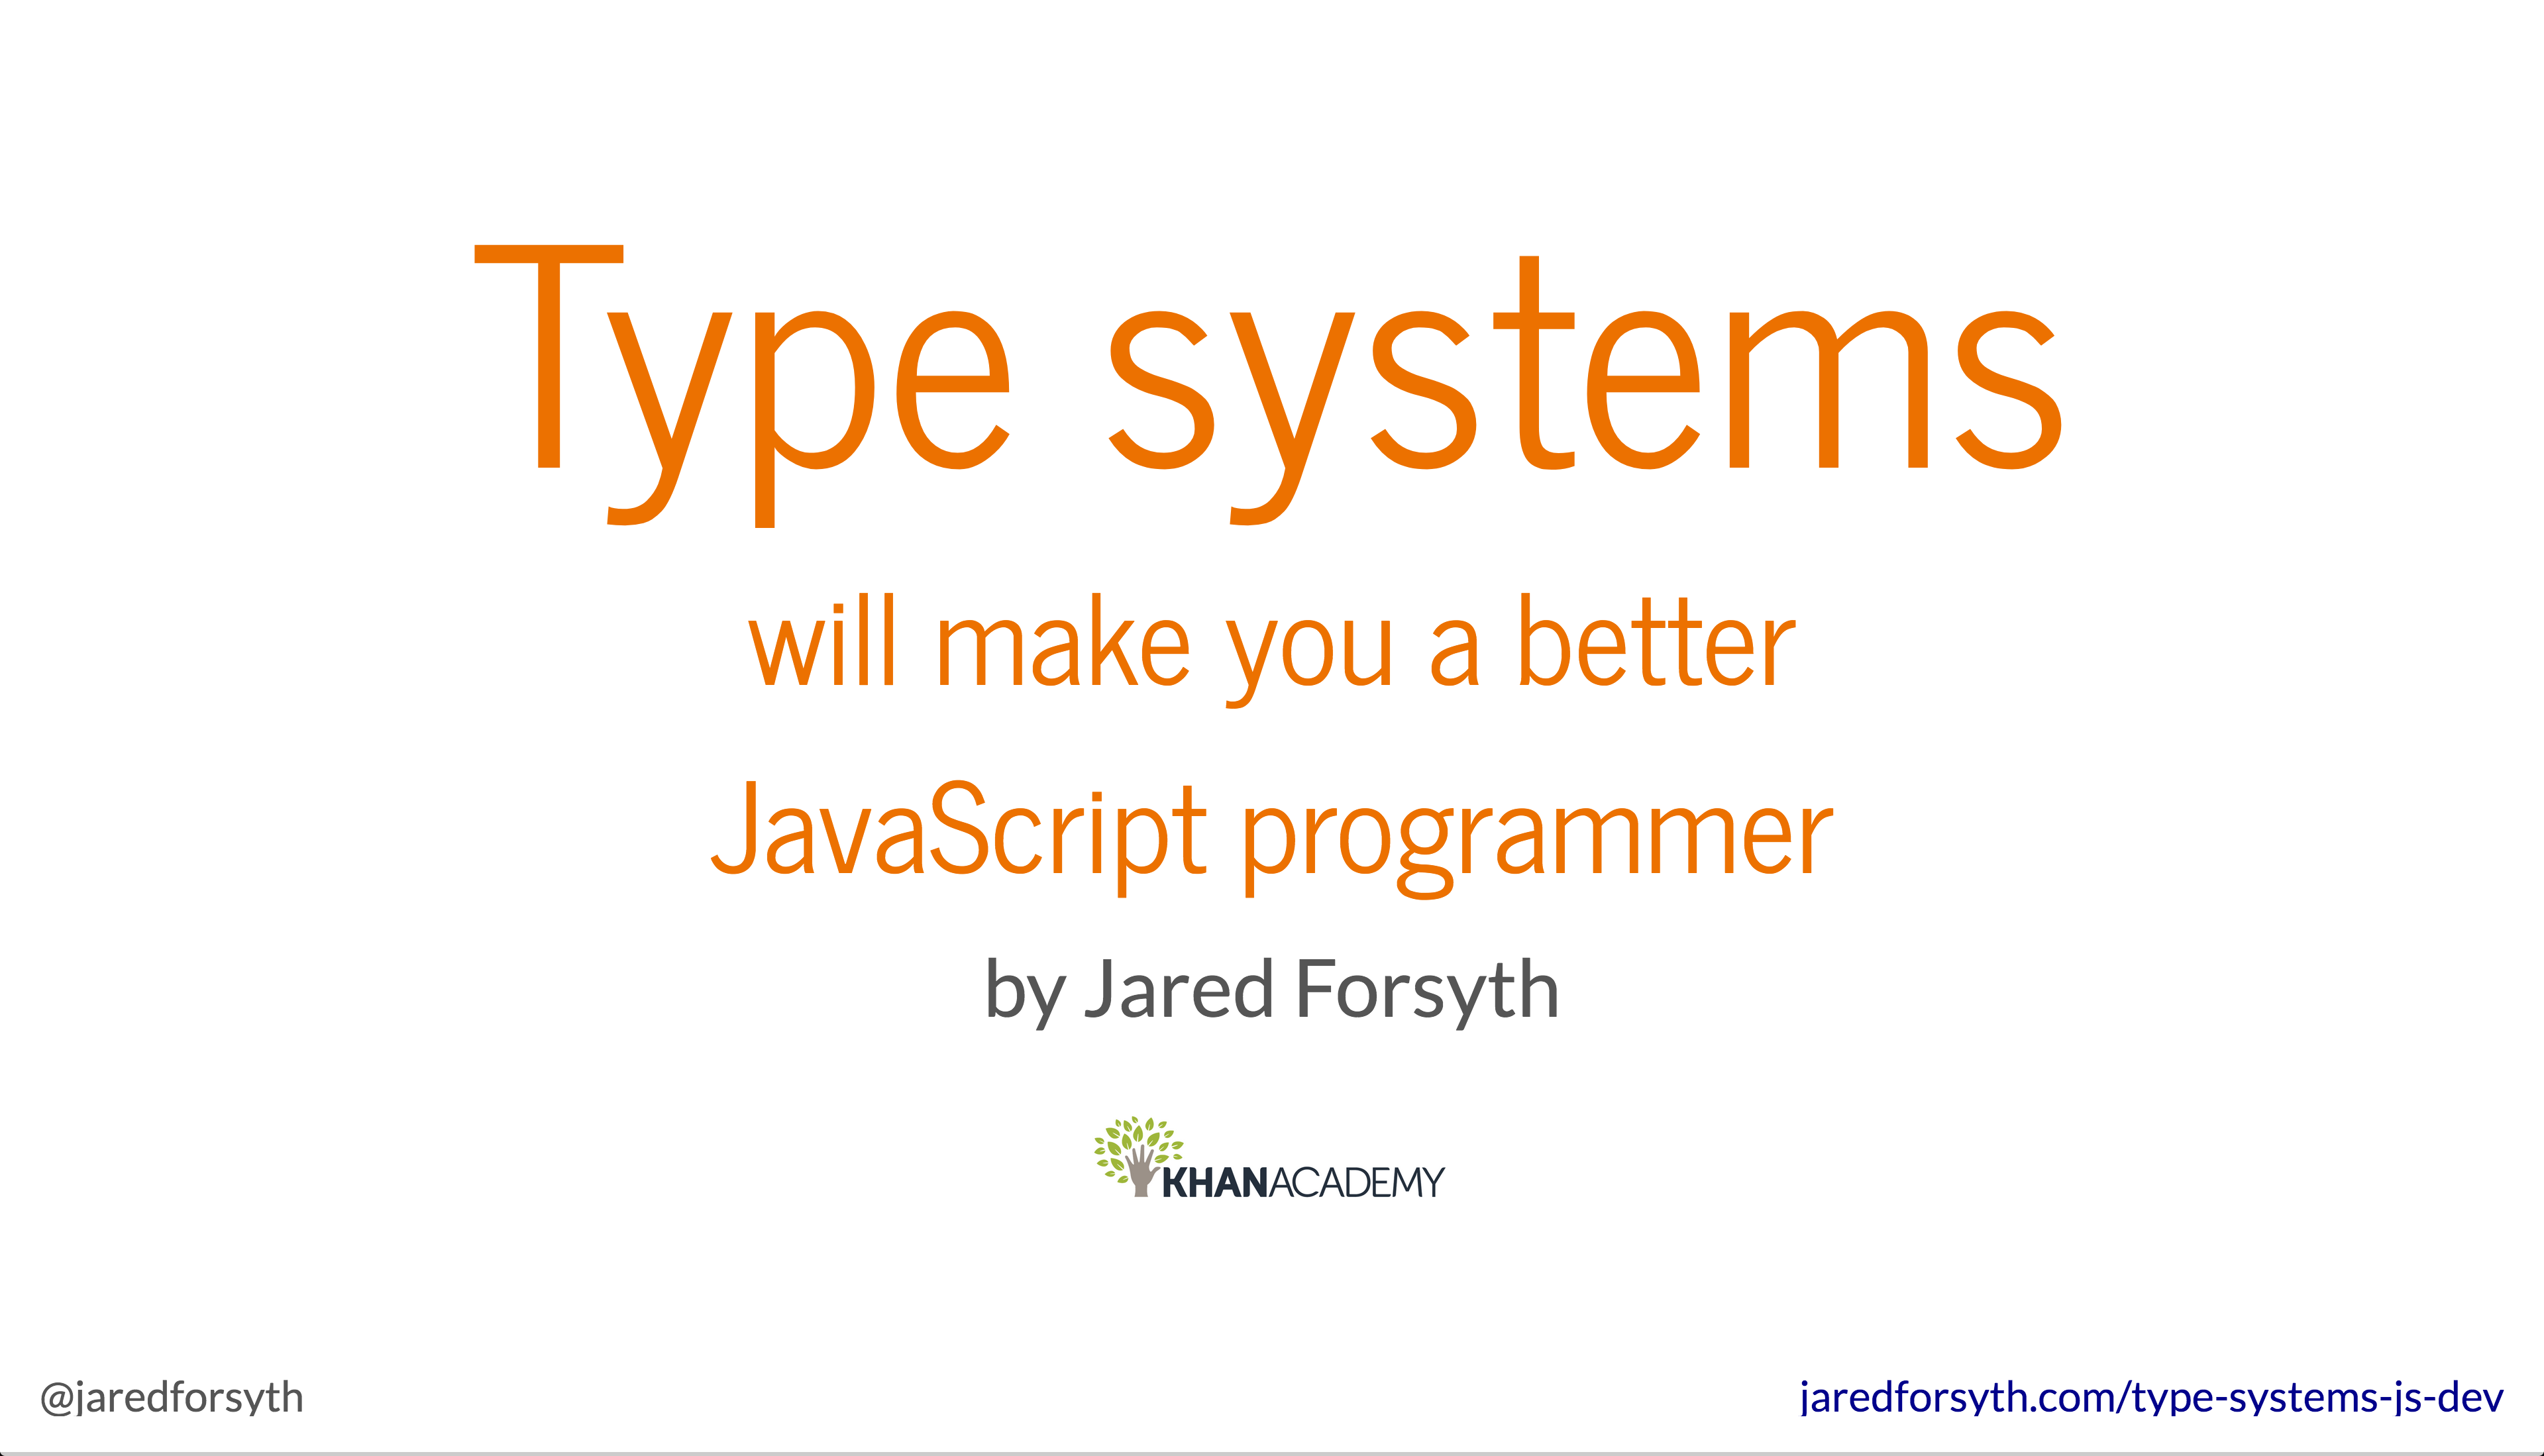 Type systems will make you a better JavaScript developer